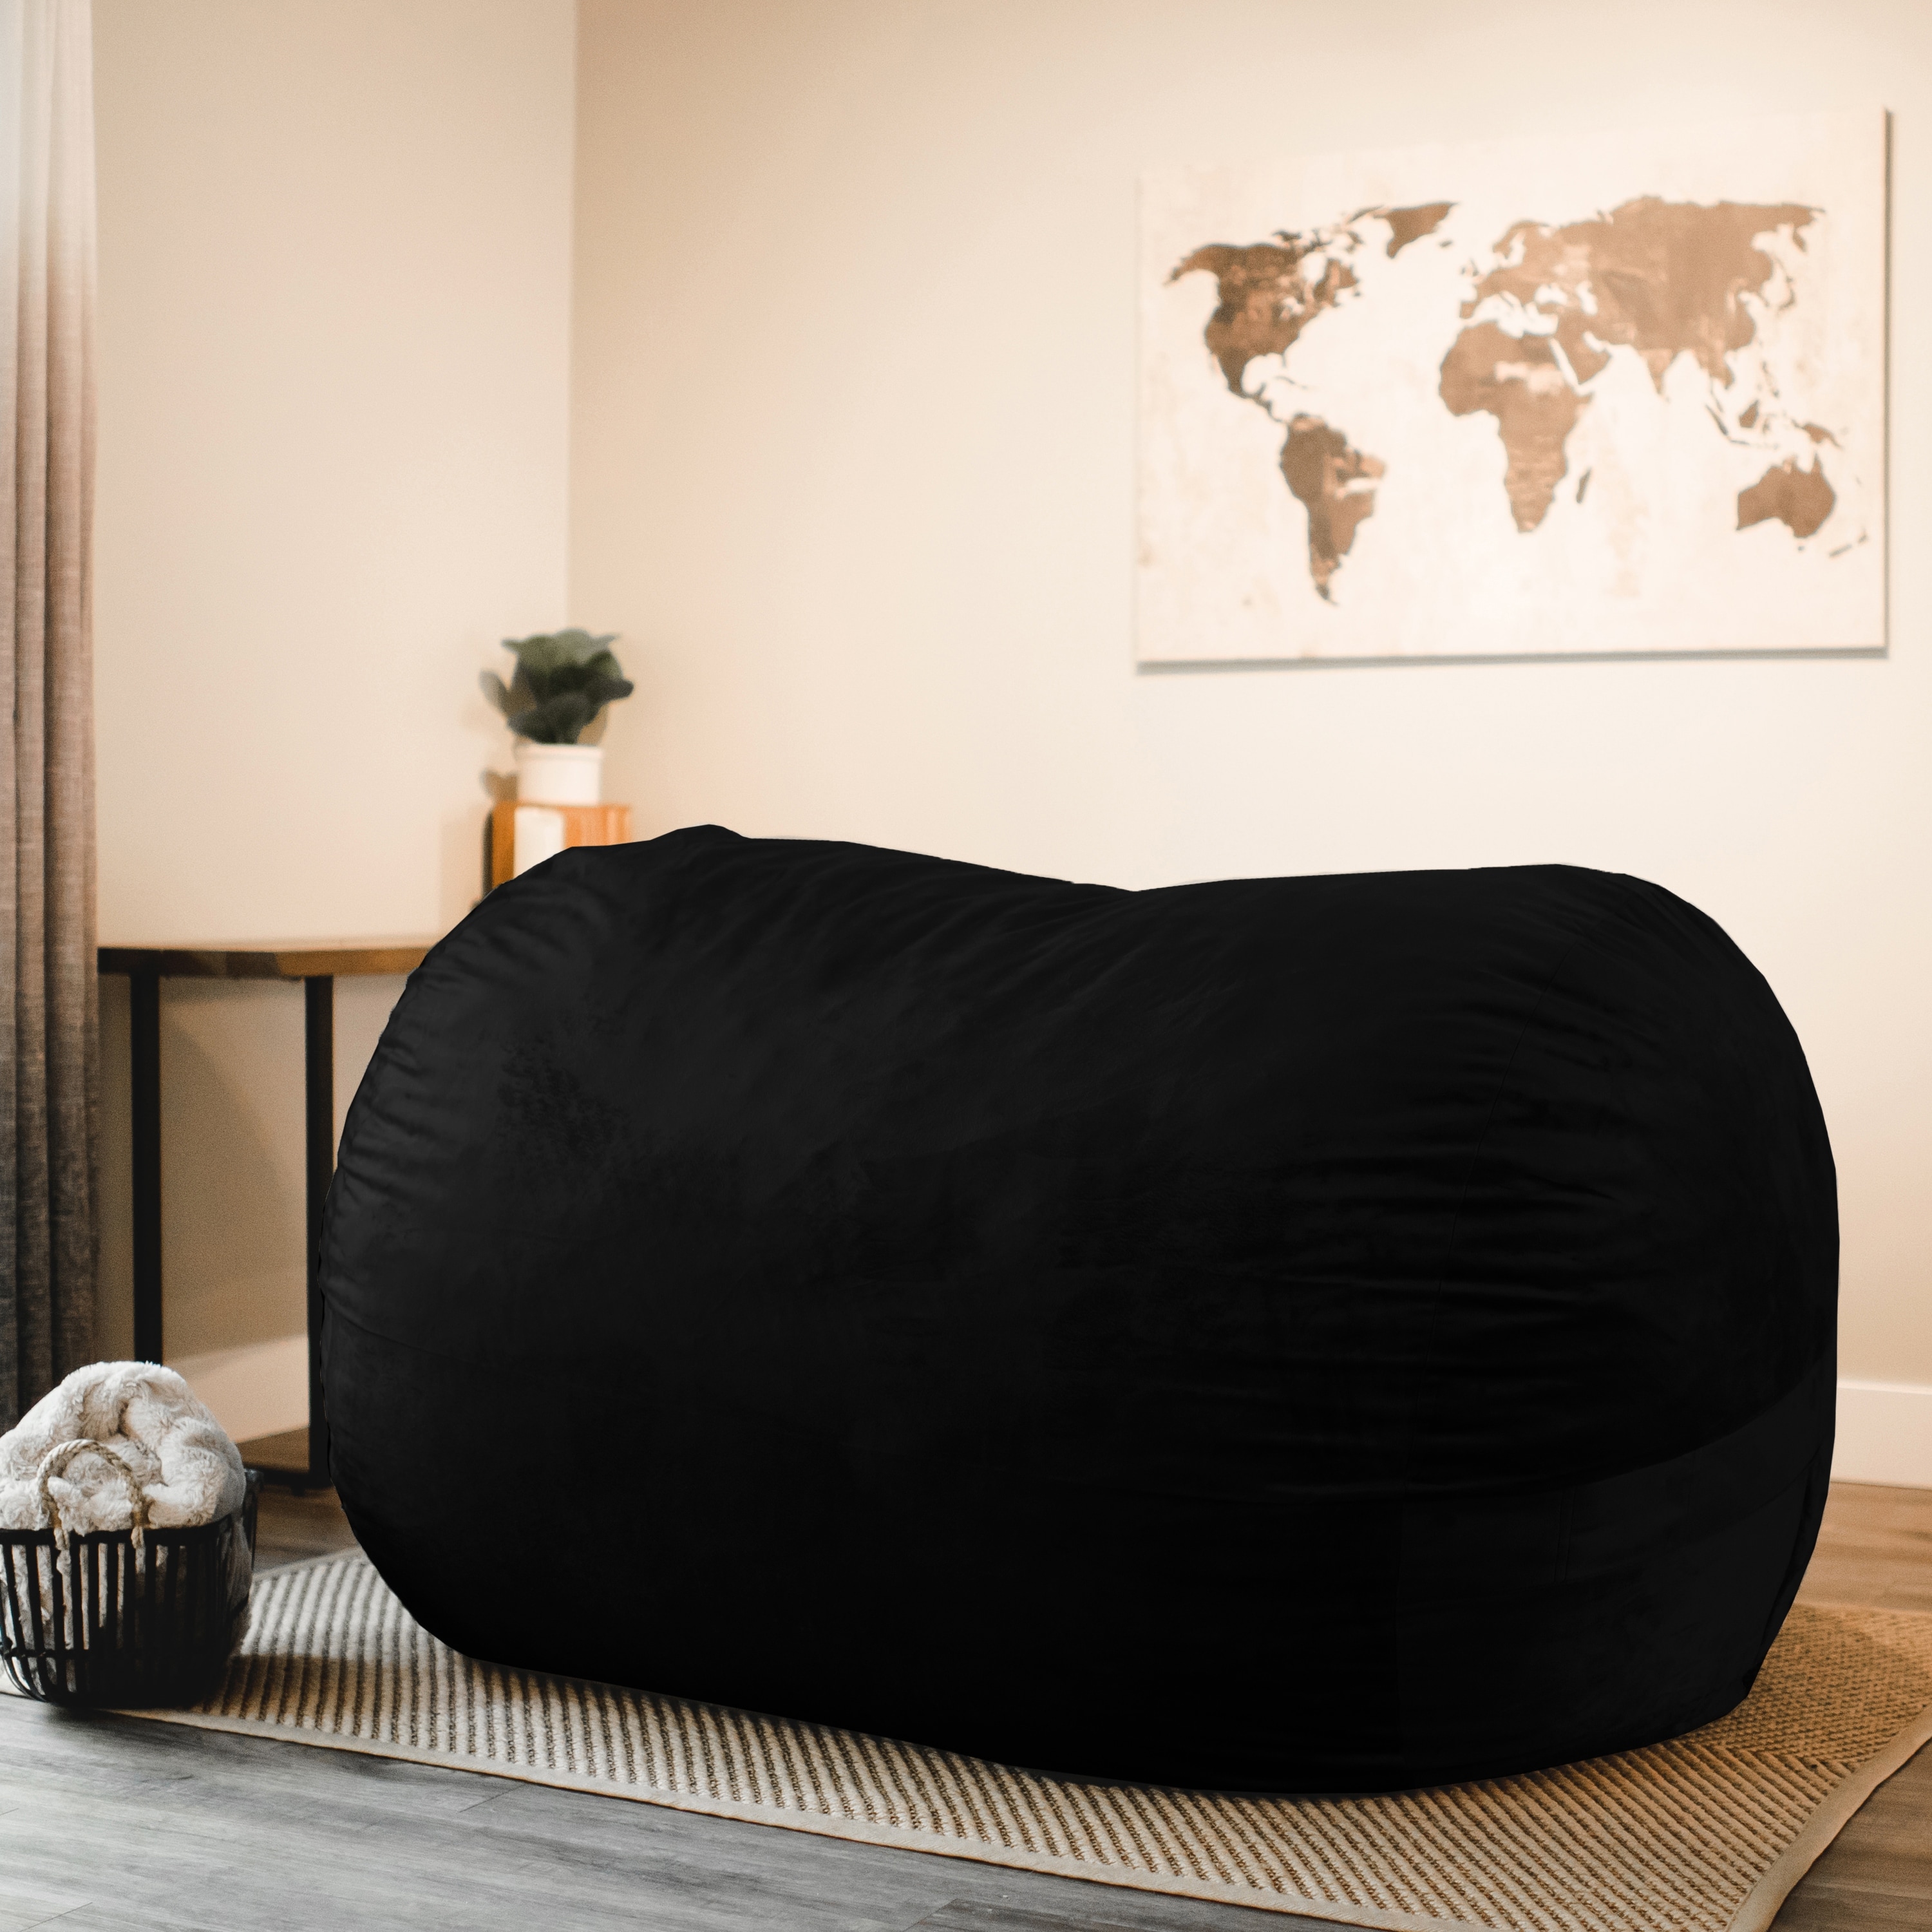 https://ak1.ostkcdn.com/images/products/is/images/direct/5037360fd87409e71f5edb30ad211a5e748c402d/Big-Joe-XL-Fuf-Bean-Bag-Chair-w--Removable-Cover.jpg